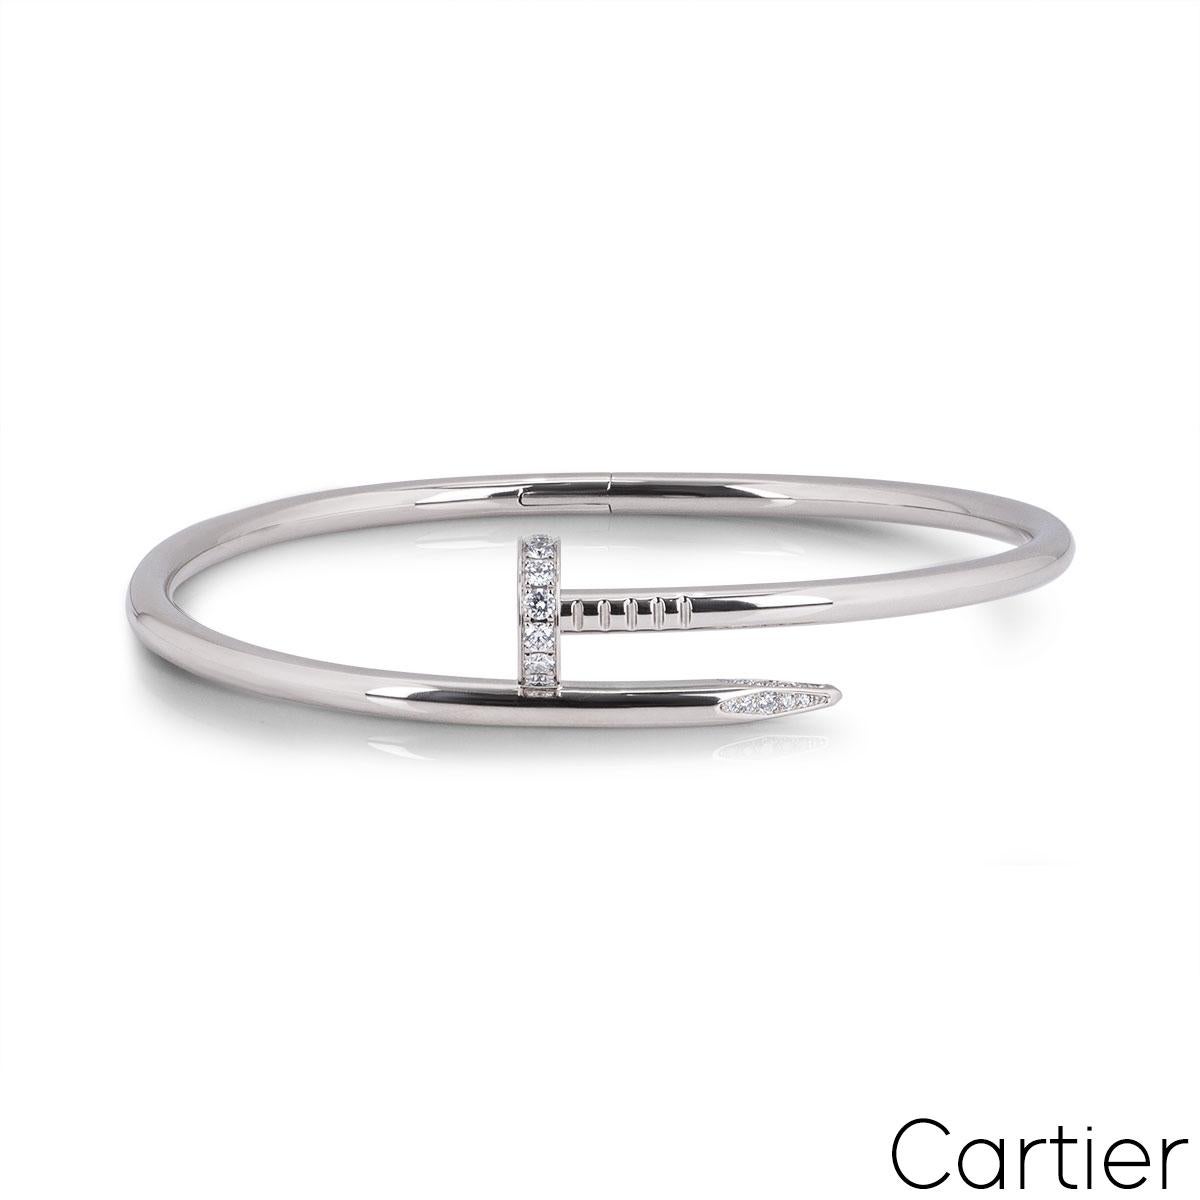 An 18k white gold and diamond bracelet by Cartier from the Juste Un Clou collection. The bangle is in the style of a nail and has 27 round brilliant cut pave diamonds set in the head and tip, totalling 0.54ct. The bangle is size 15 and features the